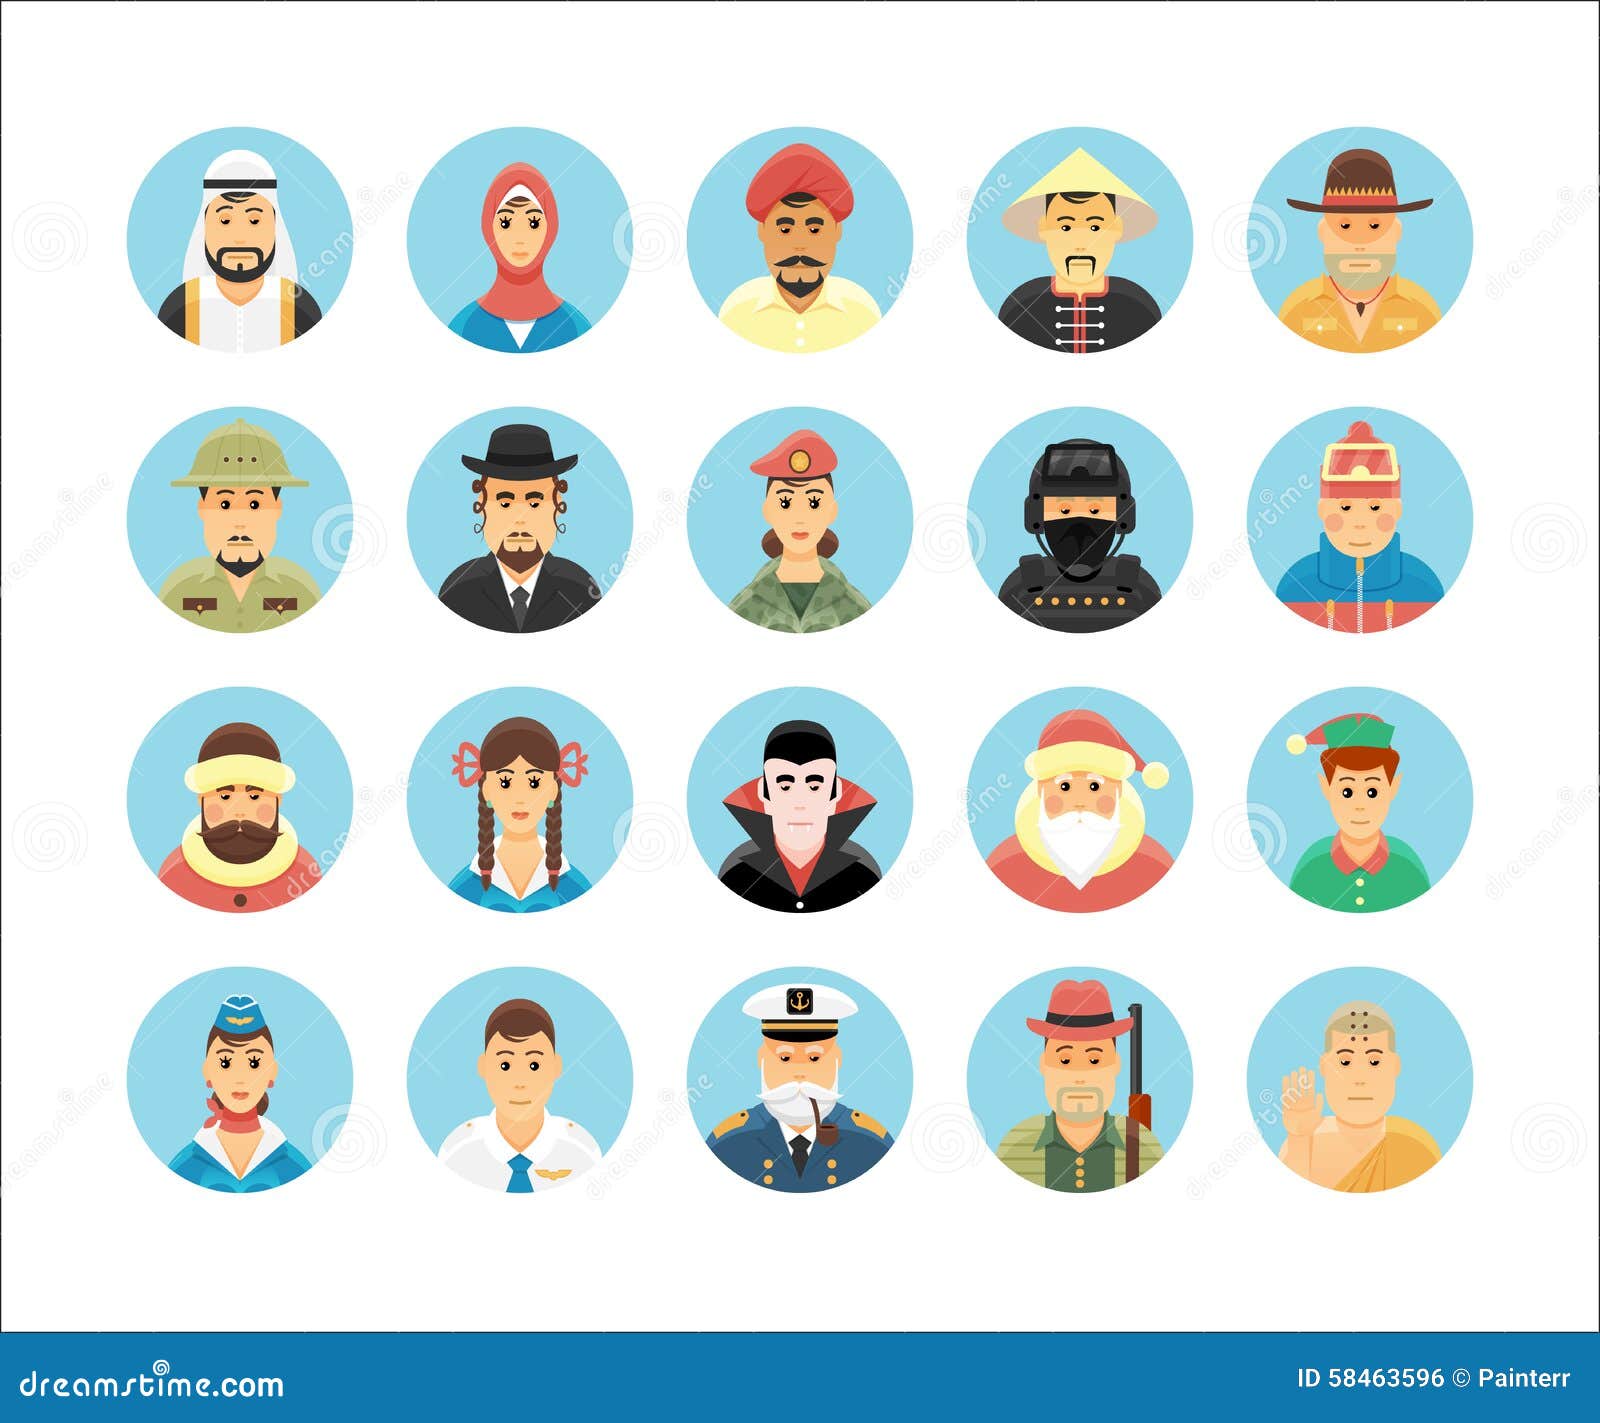 persons icons collection. icons set illustrating people occupations, lifestyles, nations.